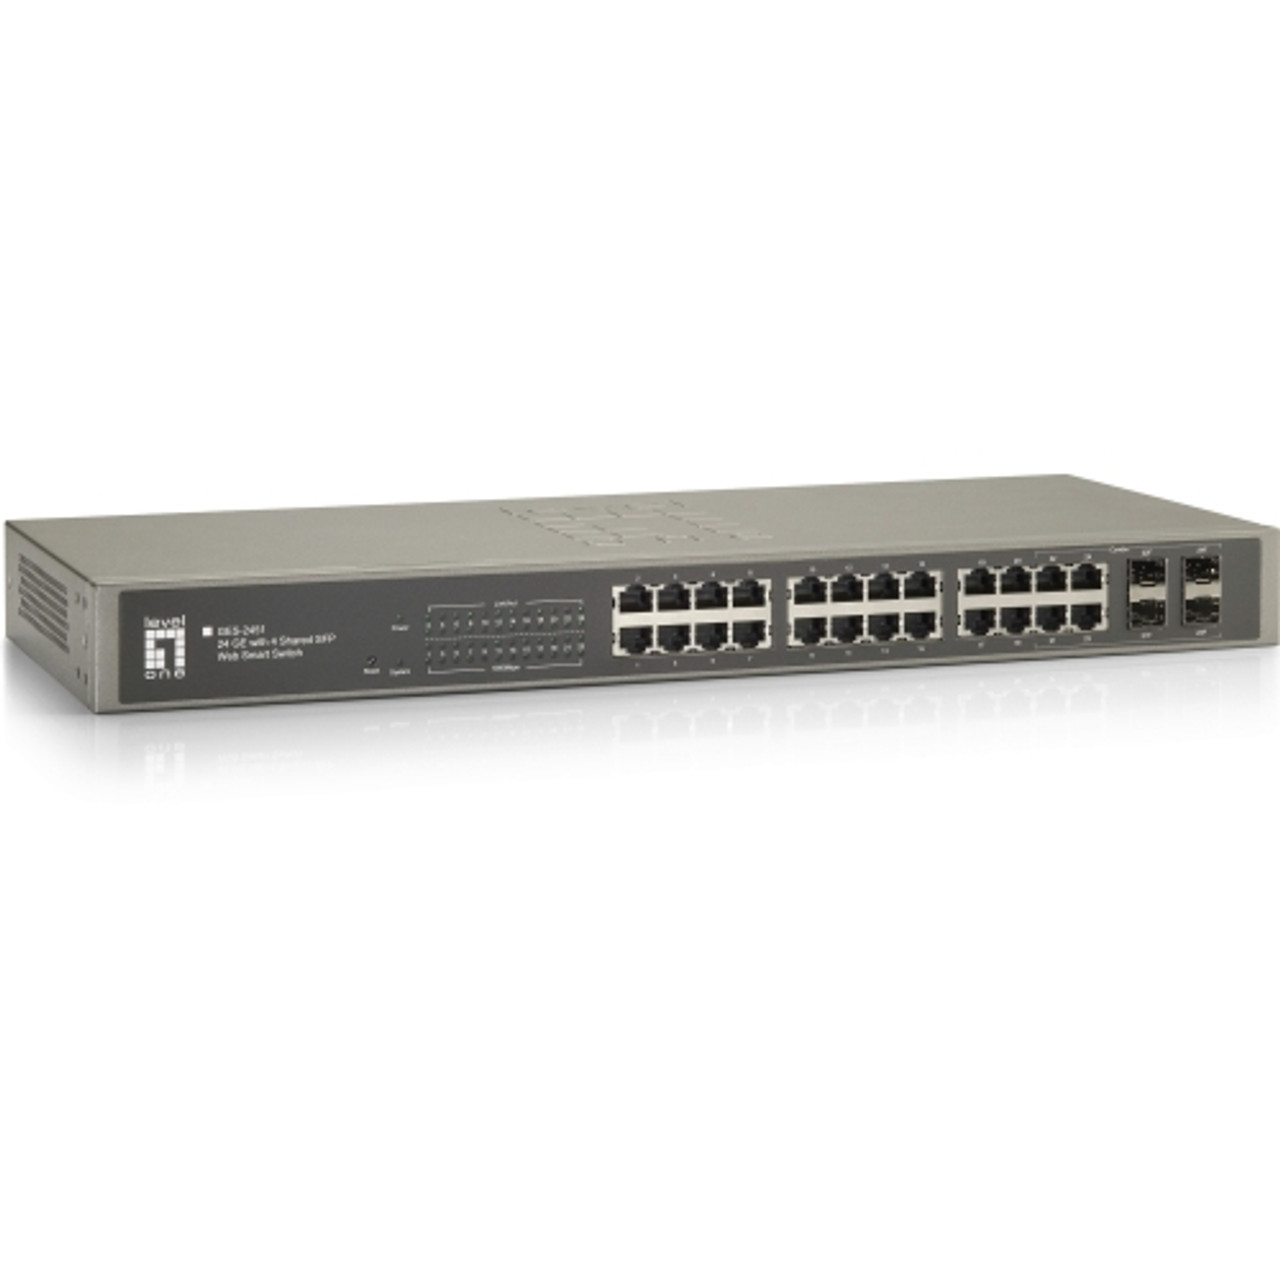 GES-2451 LevelOne 24 GE with 4 Shared SFP Web Smart Switch Manageable 2 Layer Supported Desktop, Rack-mountable (Refurbished)